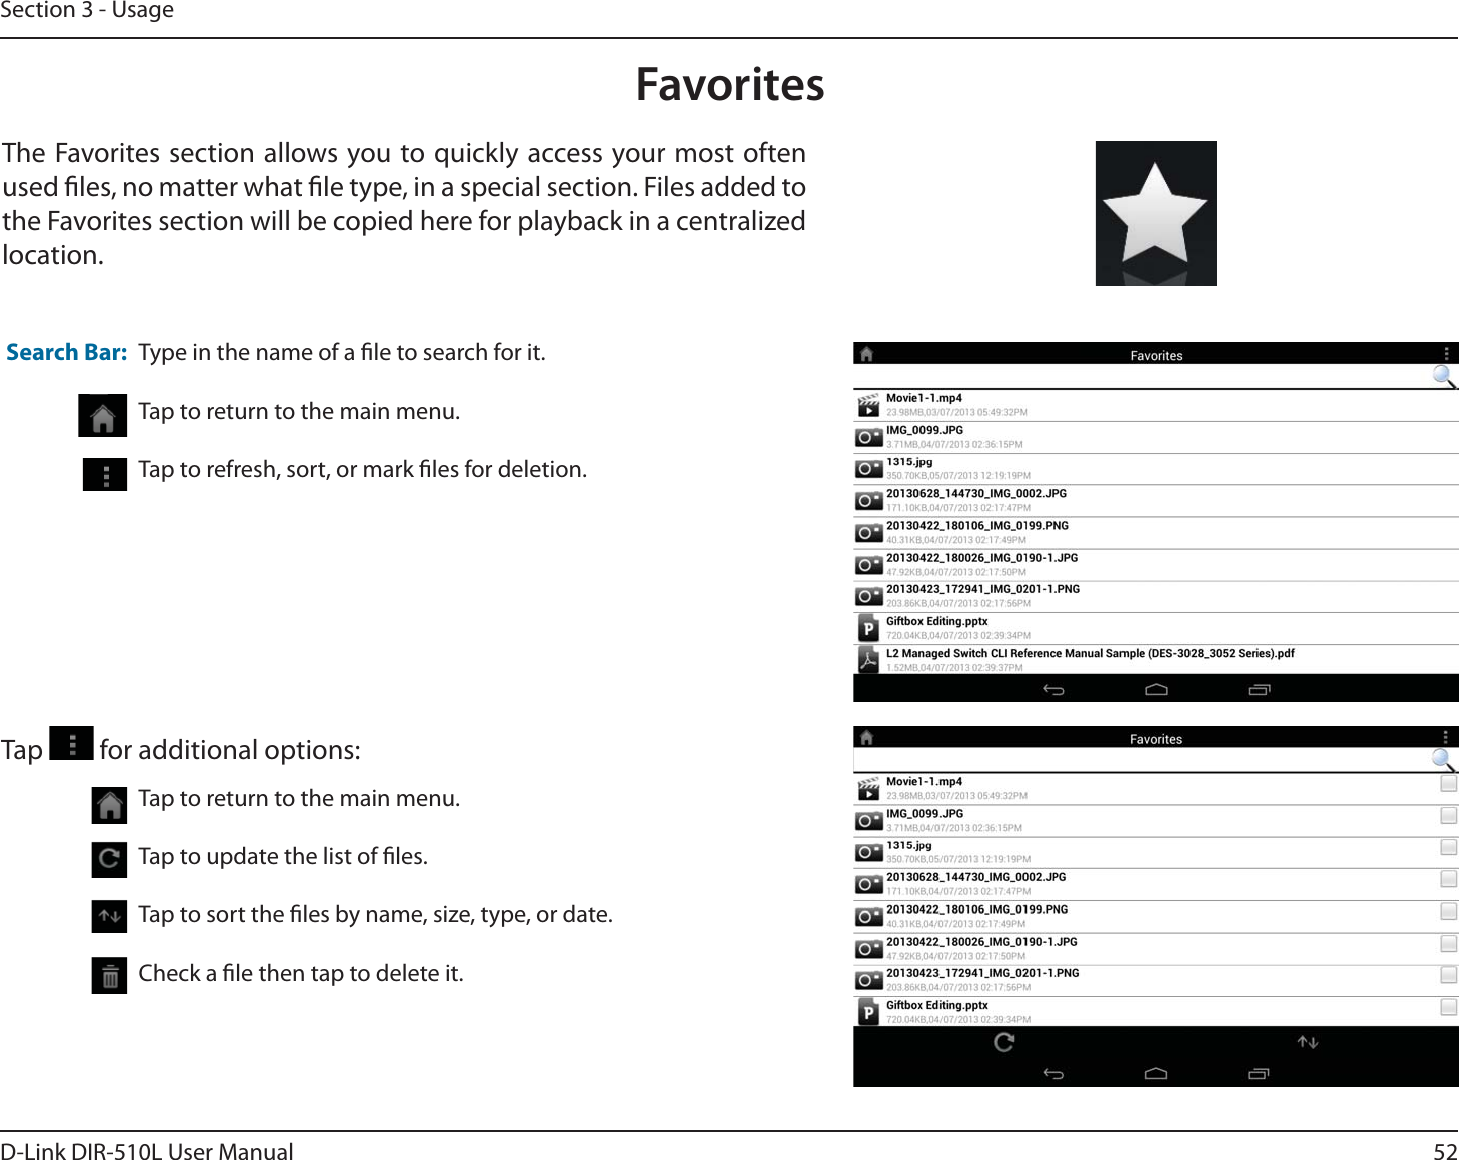 52D-Link DIR-510L User ManualSection 3 - UsageFavoritesThe Favorites section allows you to quickly access your most often used les, no matter what le type, in a special section. Files added to the Favorites section will be copied here for playback in a centralized location.Type in the name of a le to search for it.Tap to return to the main menu.Tap to refresh, sort, or mark les for deletion.Search Bar:Tap to return to the main menu.Tap to update the list of les.Tap to sort the les by name, size, type, or date.Check a le then tap to delete it.Tap   for additional options: